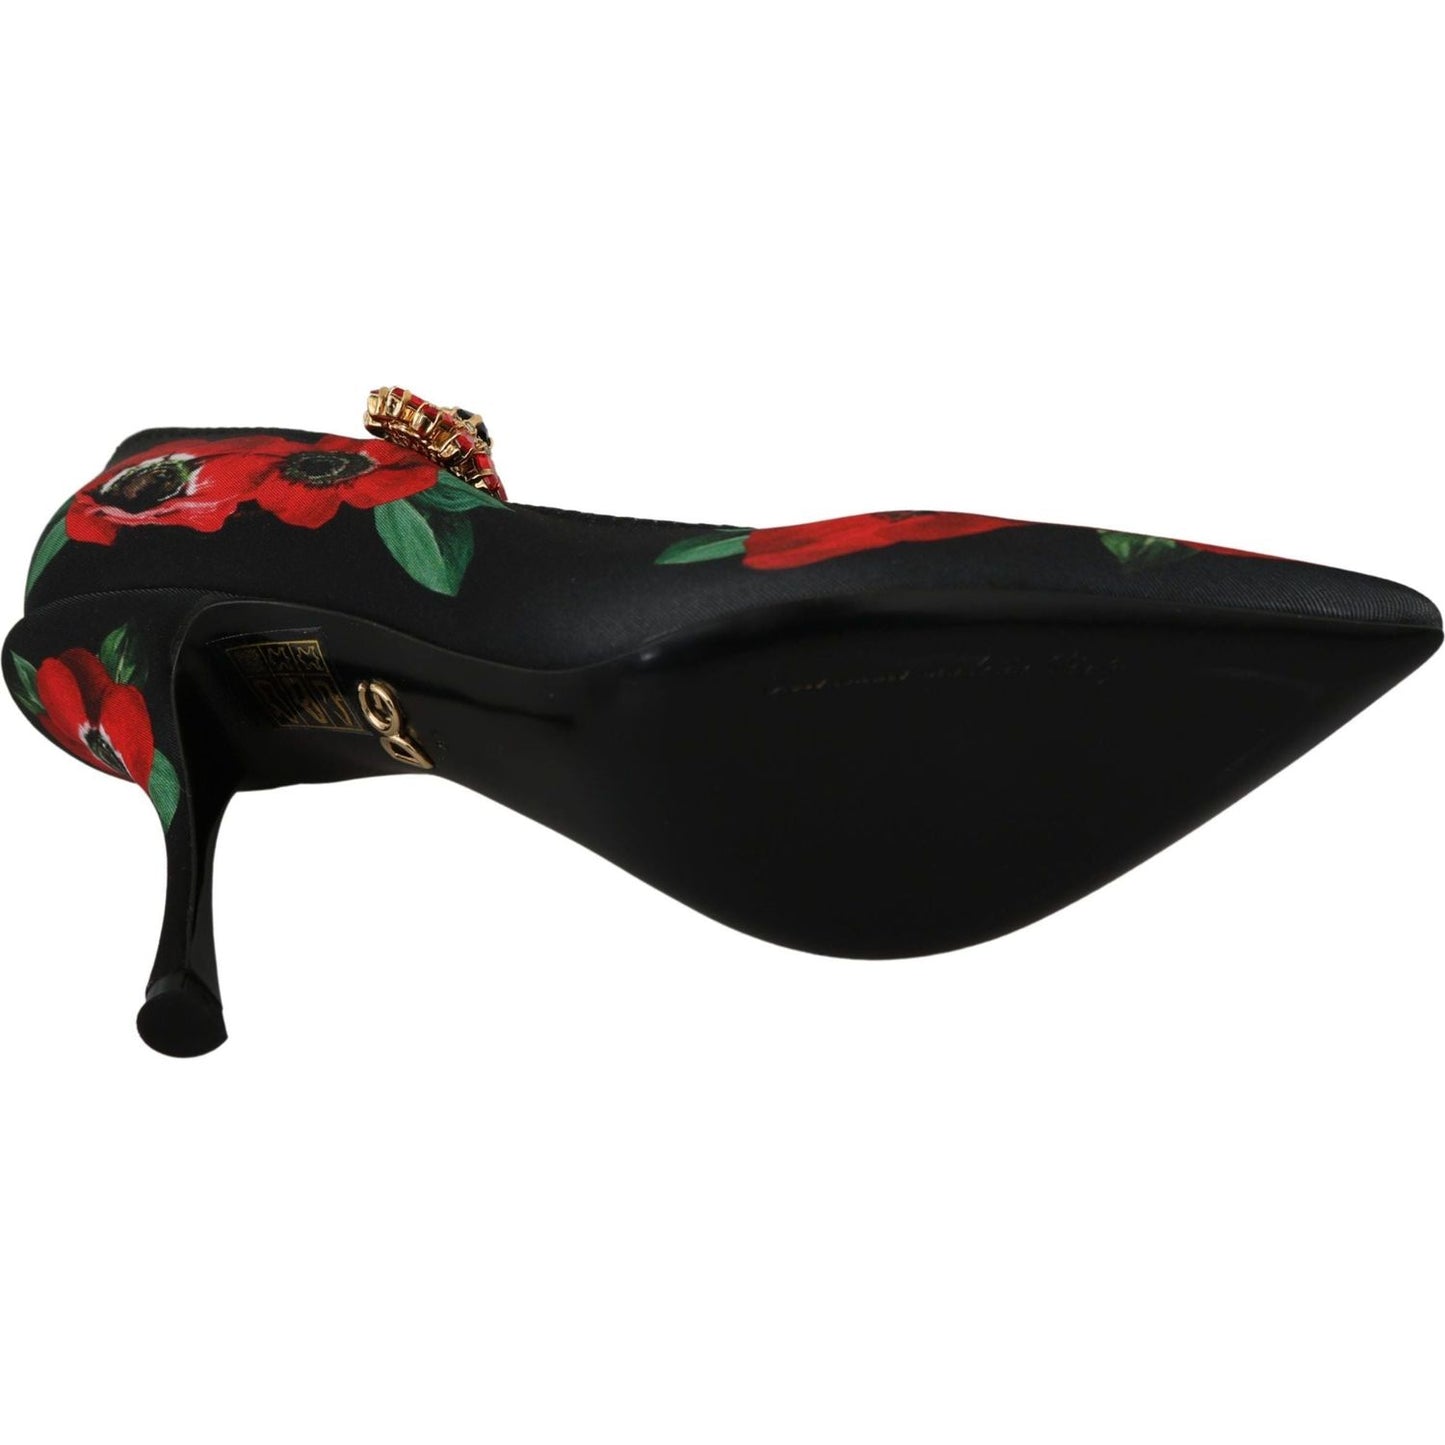 Dolce & Gabbana Floral Mary Janes Pumps with Crystal Detail black-red-floral-mary-janes-pumps-shoes Shoes IMG_0221-scaled-4abd5e54-39a.jpg